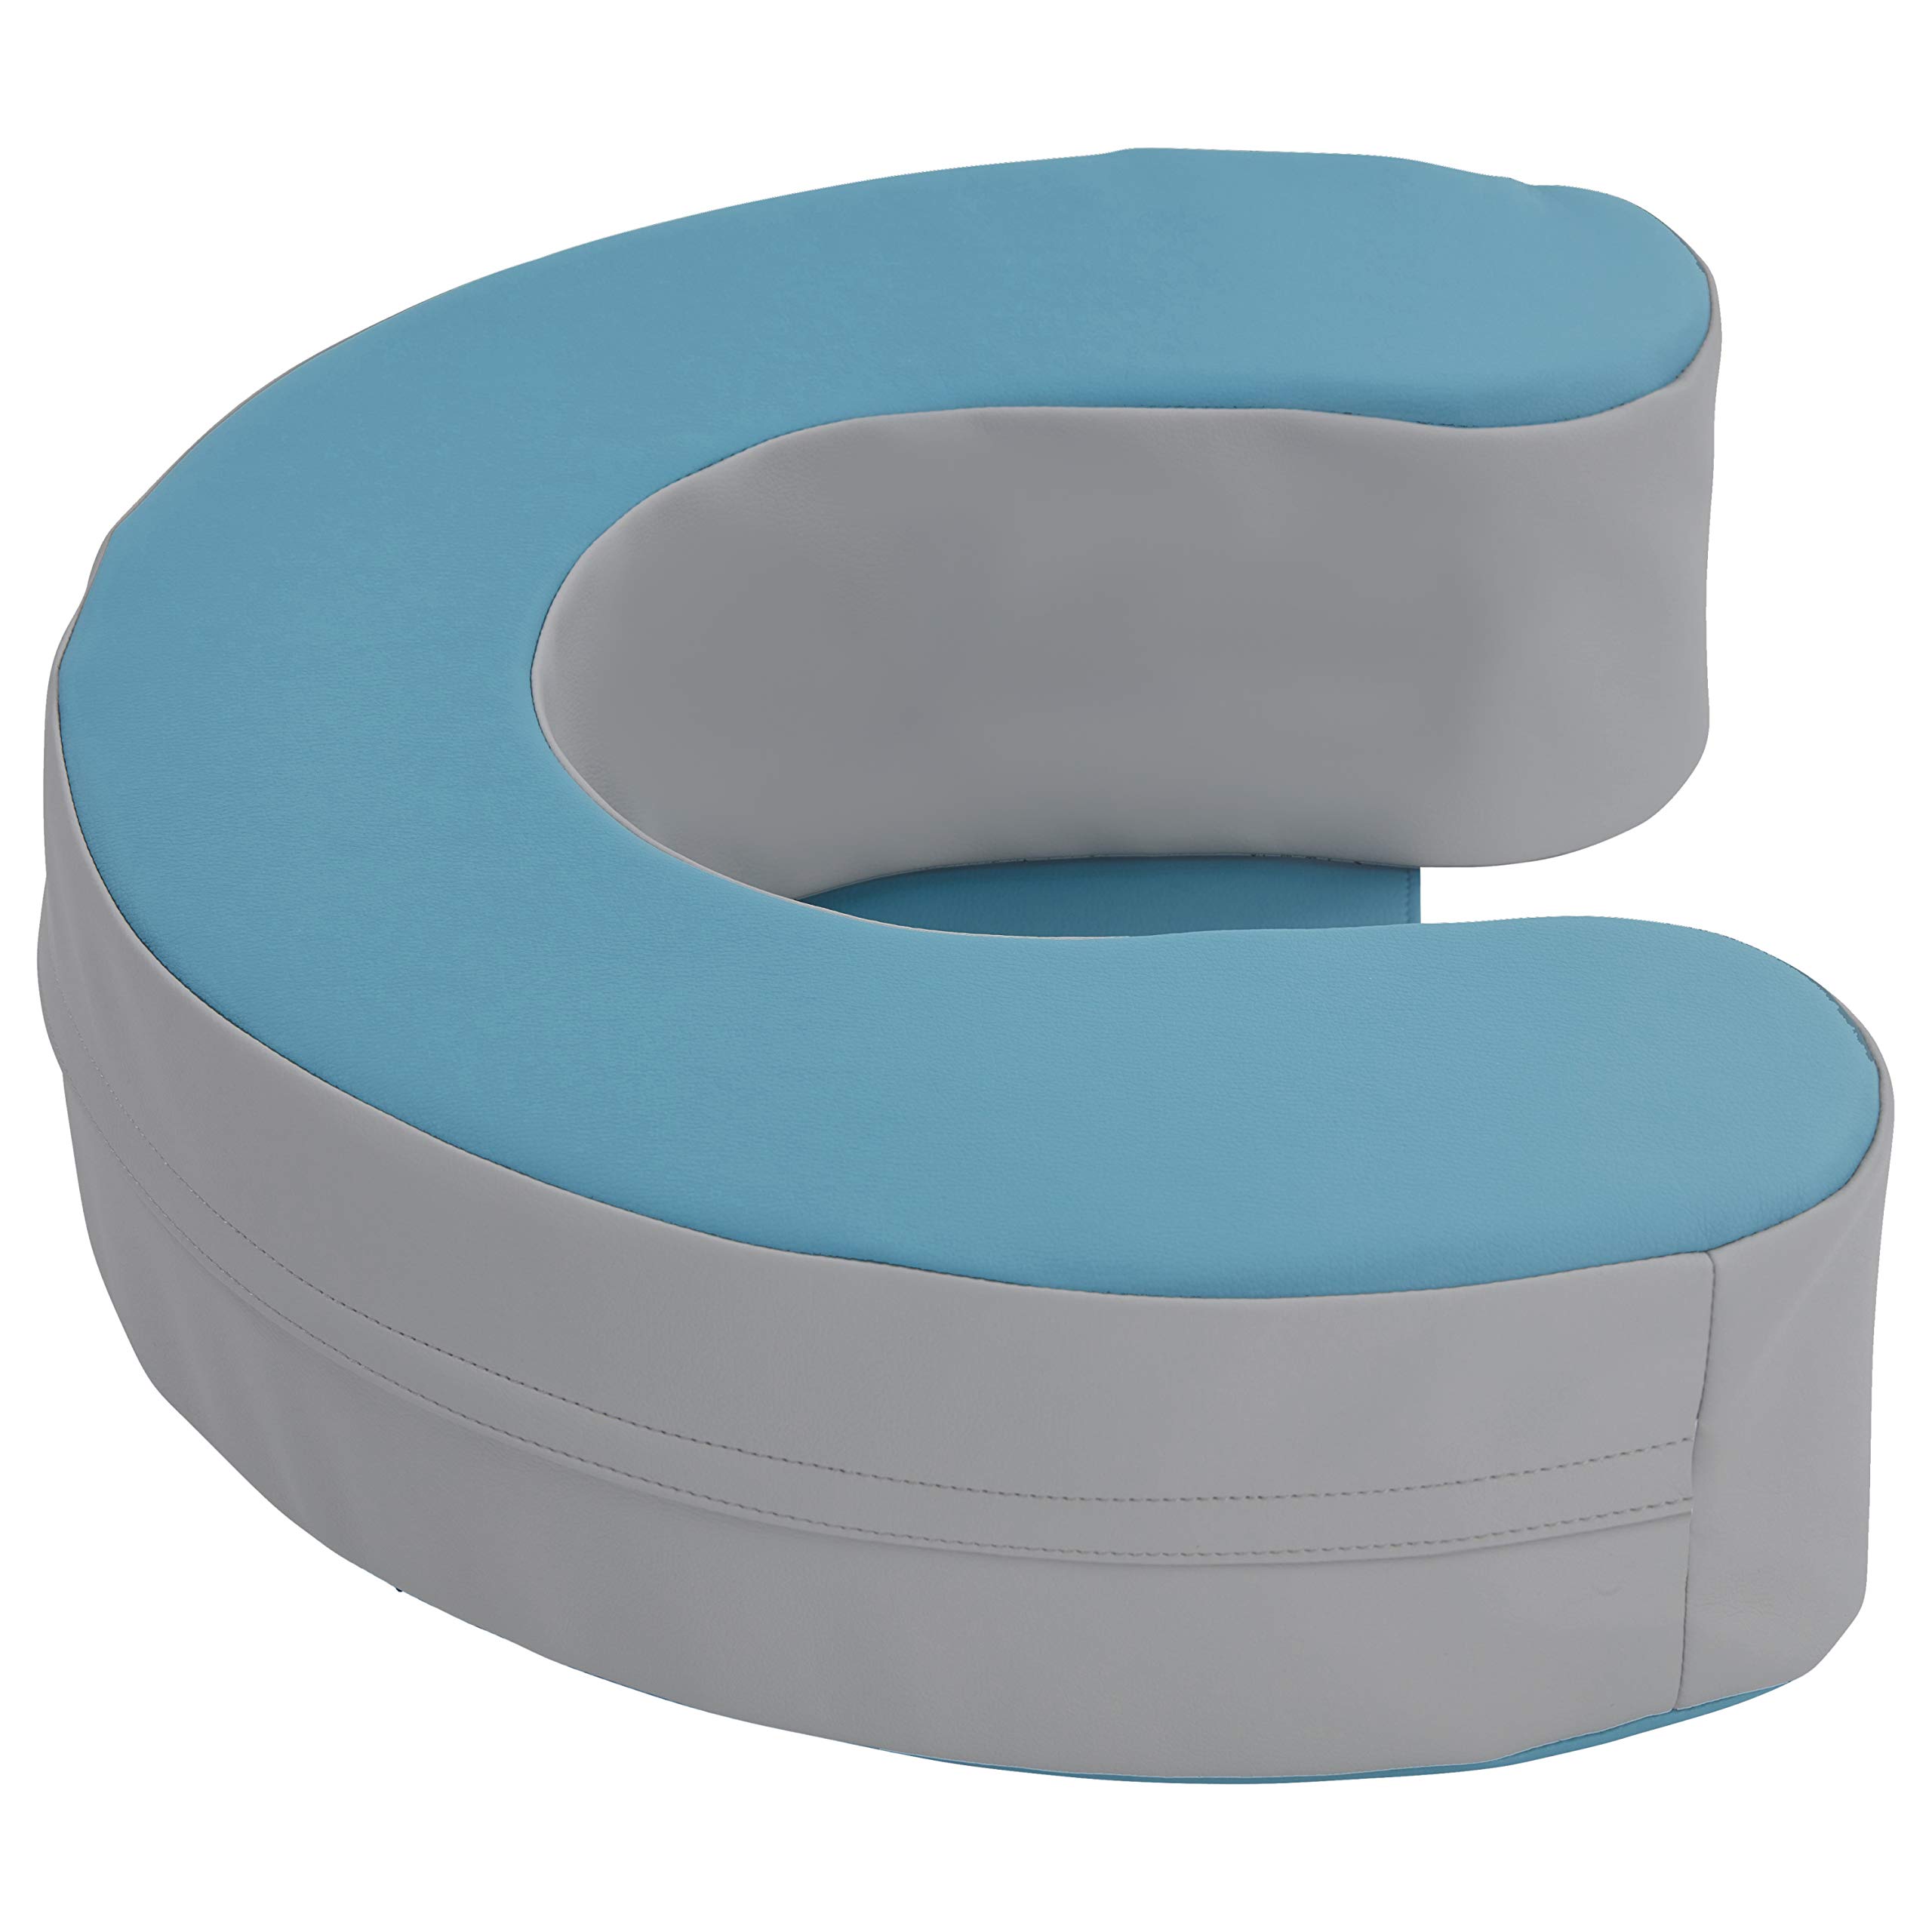 Factory Direct Partners 10423-TLGY SoftScape Sit and Support Ring for Babies and Infants, Soft Cushioned Foam Floor Seat with Non-Slip Bottom for Nursey, Playroom, Daycare - Teal/Gray